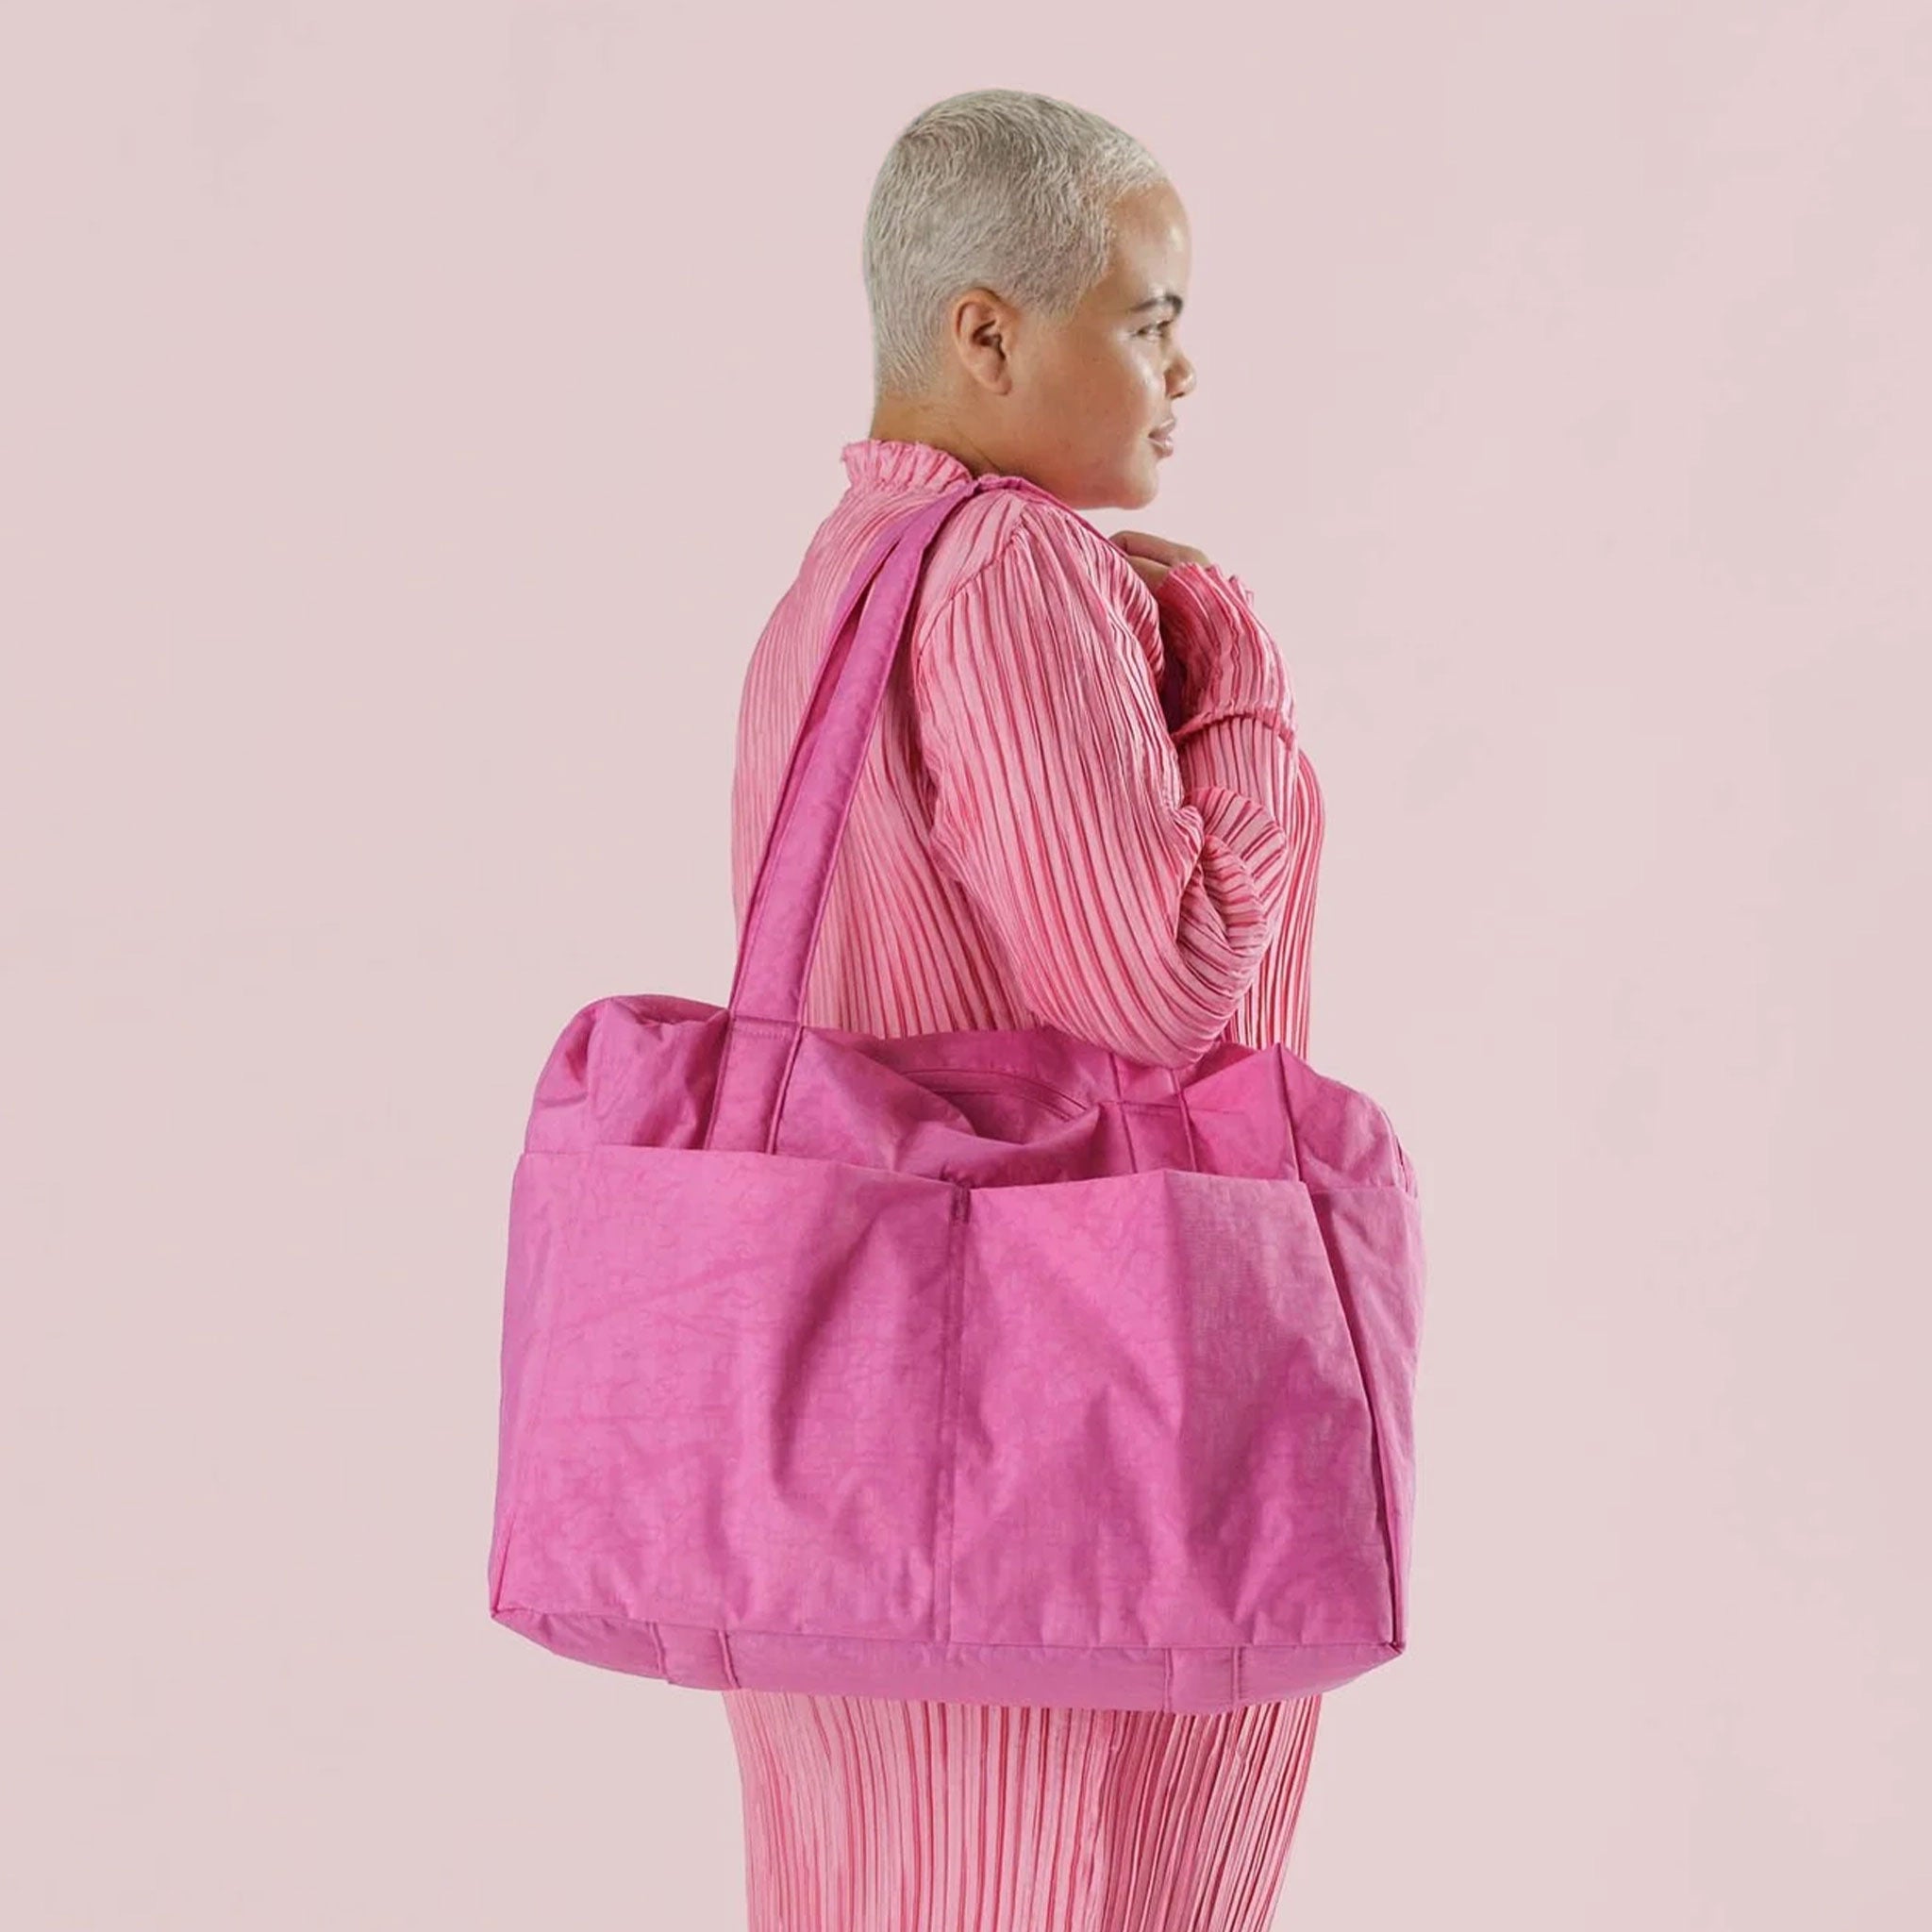 On a light pink background is a bright pink tote bag with a shoulder strap and pockets.